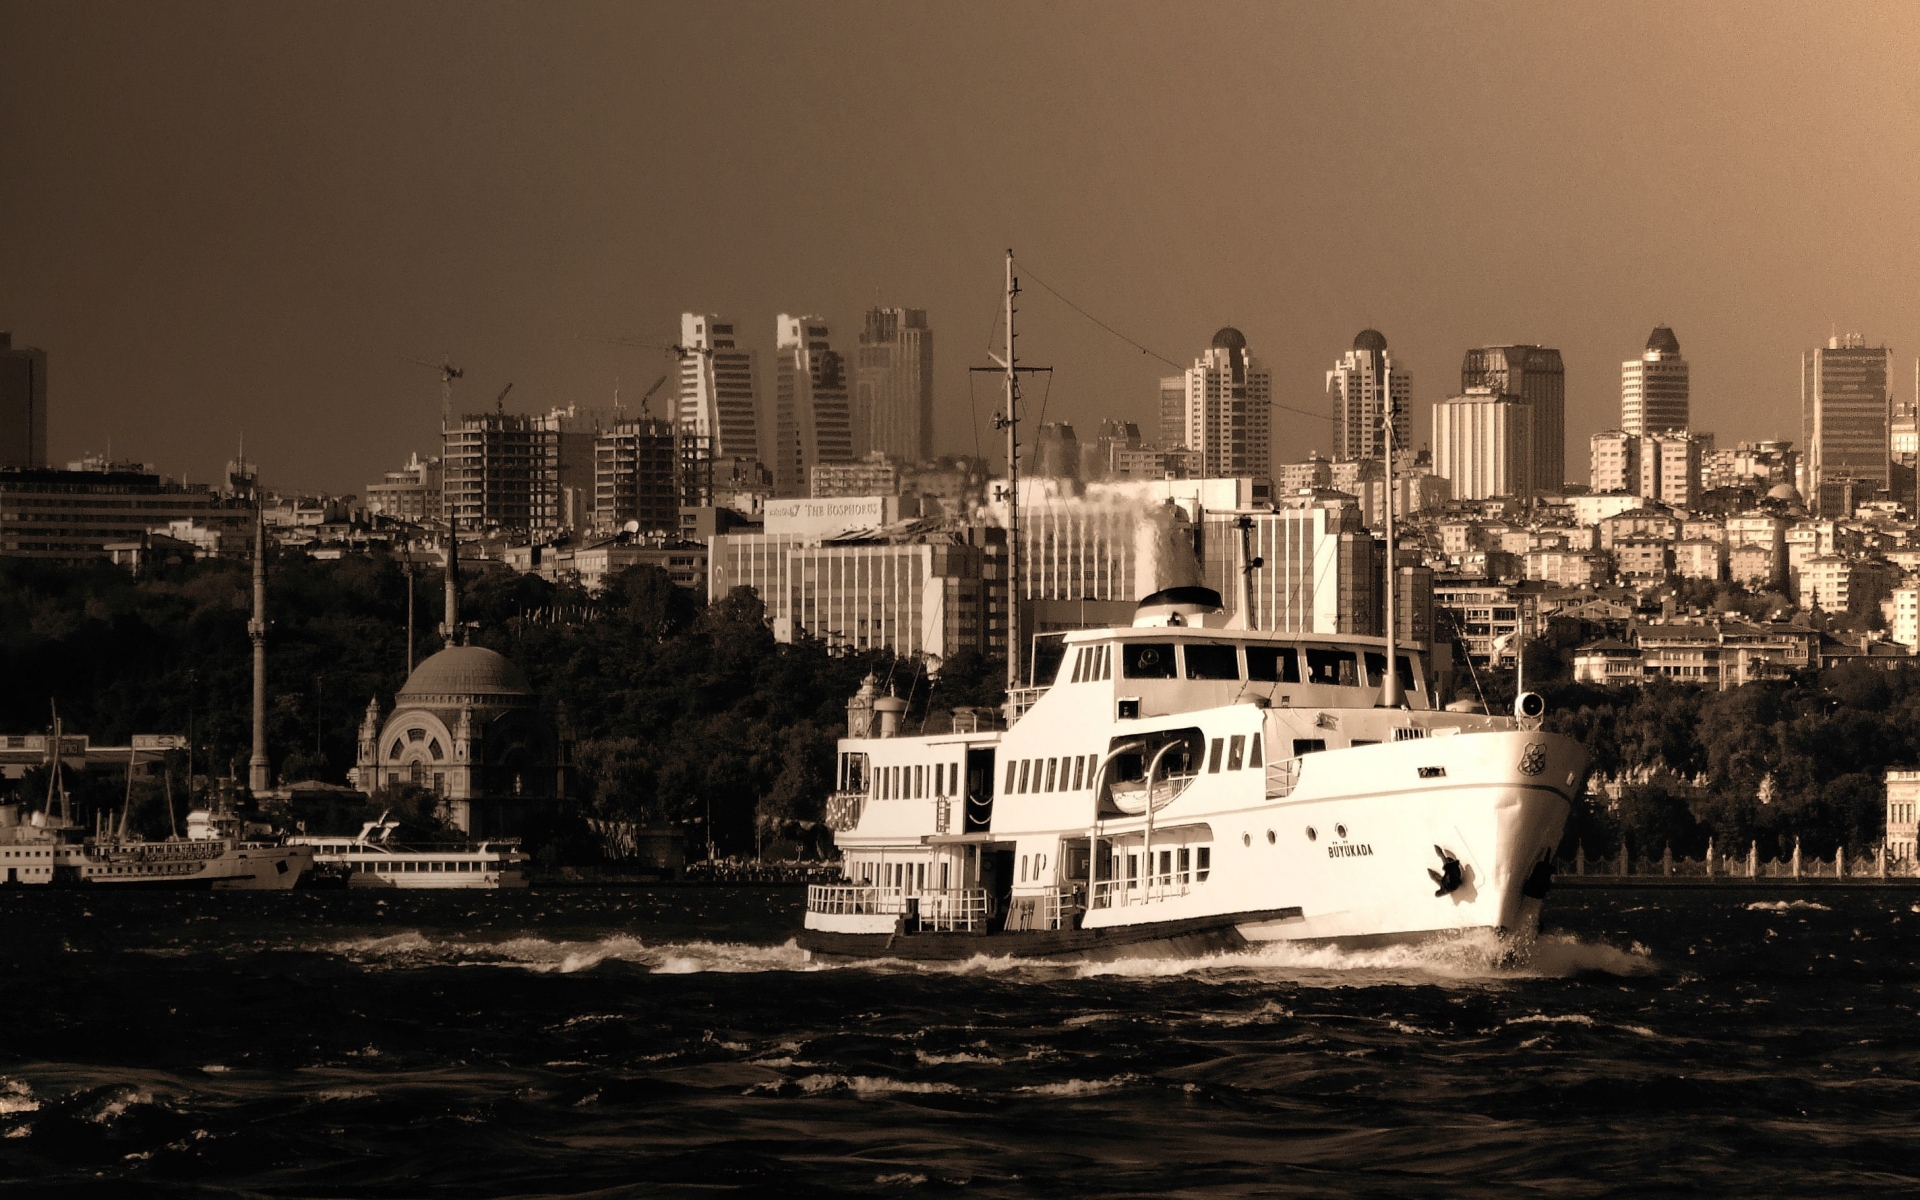 ships, Turkey, Istanbul, Bosphorus, Cruise, Boats, Sepia, Cities, Architecture, Buildings, Skyline, Cityscape, Bay, Harbor, Water, Sailing Wallpaper